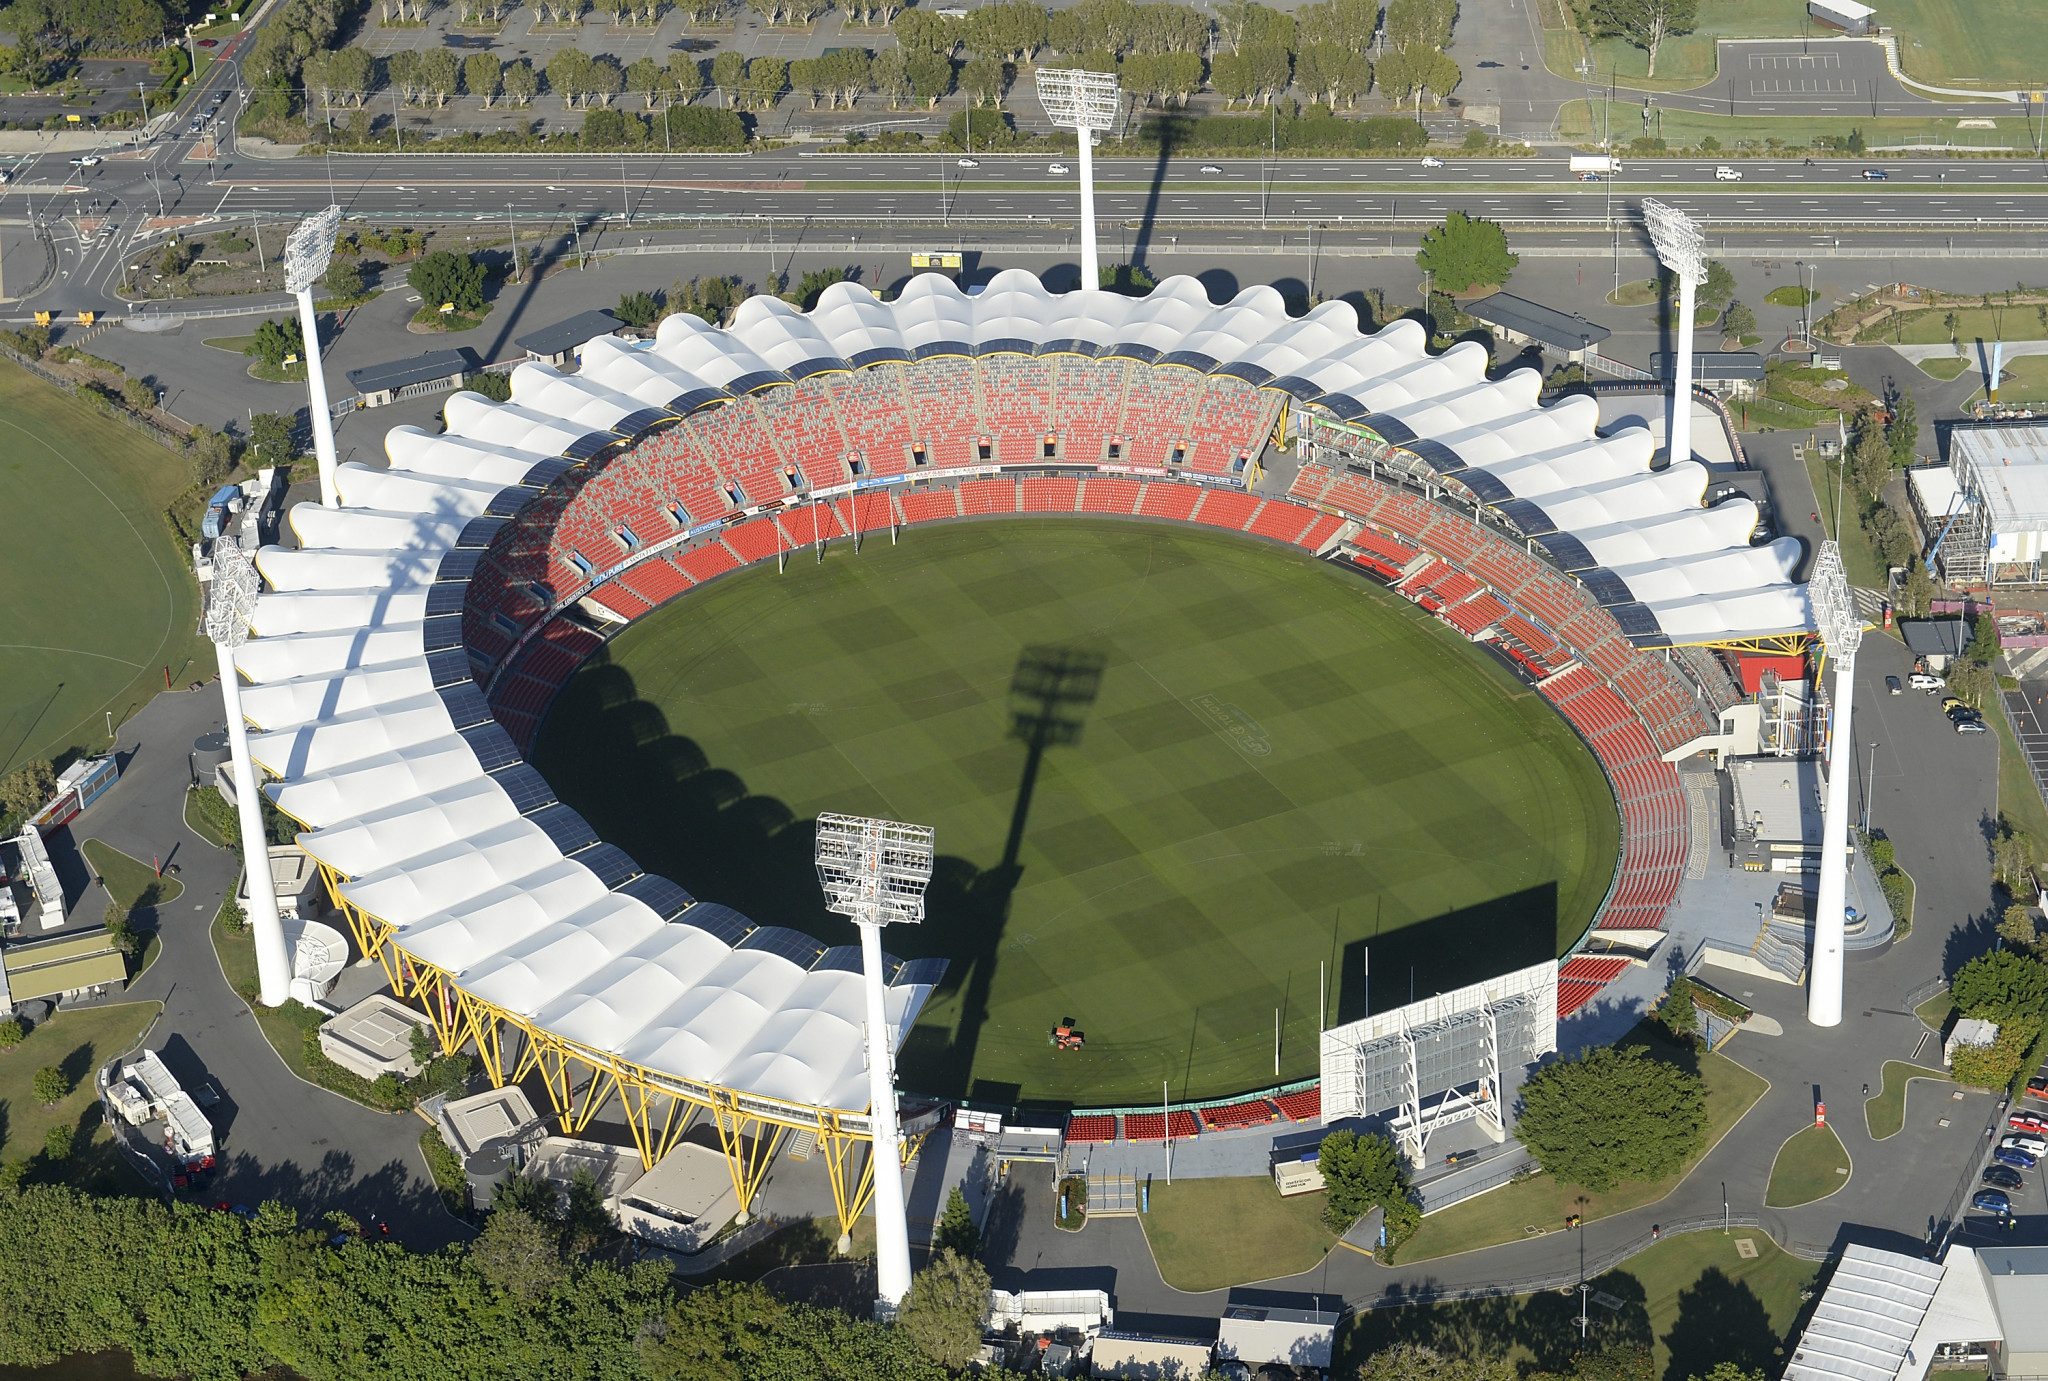 The Gold Coast 2018 Ceremonies will take place at the Carrara Stadium ©Getty Images